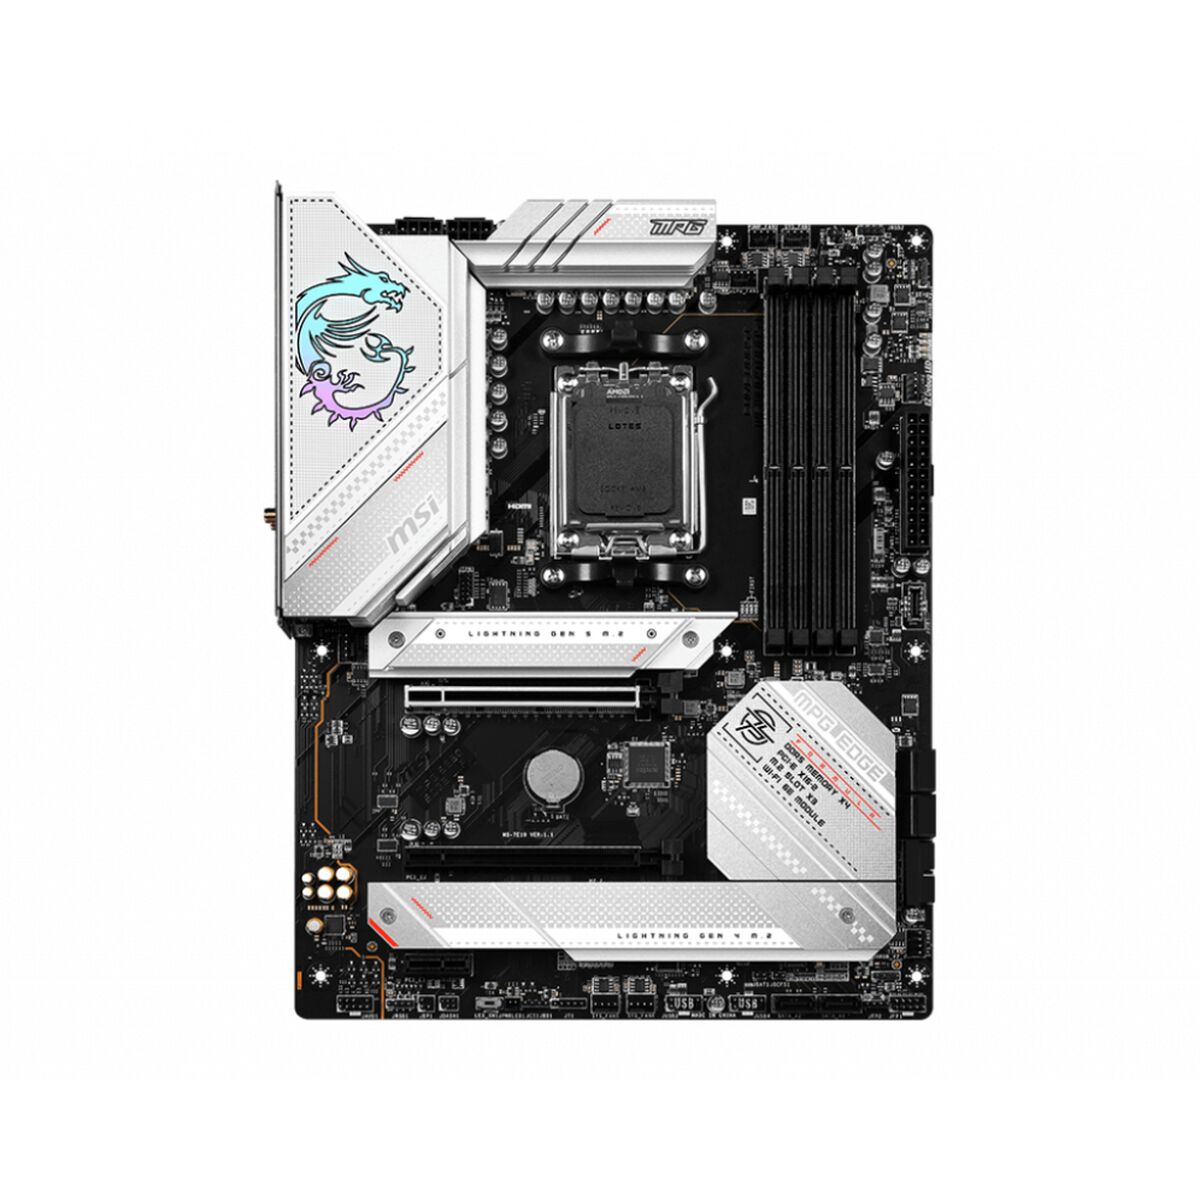 Motherboard MSI MPG B650 EDGE WI-FI AMD AM5 AMD AMD B650, MSI, Computing, Components, motherboard-msi-mpg-b650-edge-wi-fi-amd-am5-amd-amd-b650, Brand_MSI, category-reference-2609, category-reference-2803, category-reference-2804, category-reference-t-19685, category-reference-t-19912, category-reference-t-21360, category-reference-t-25660, computers / components, Condition_NEW, Price_200 - 300, Teleworking, RiotNook